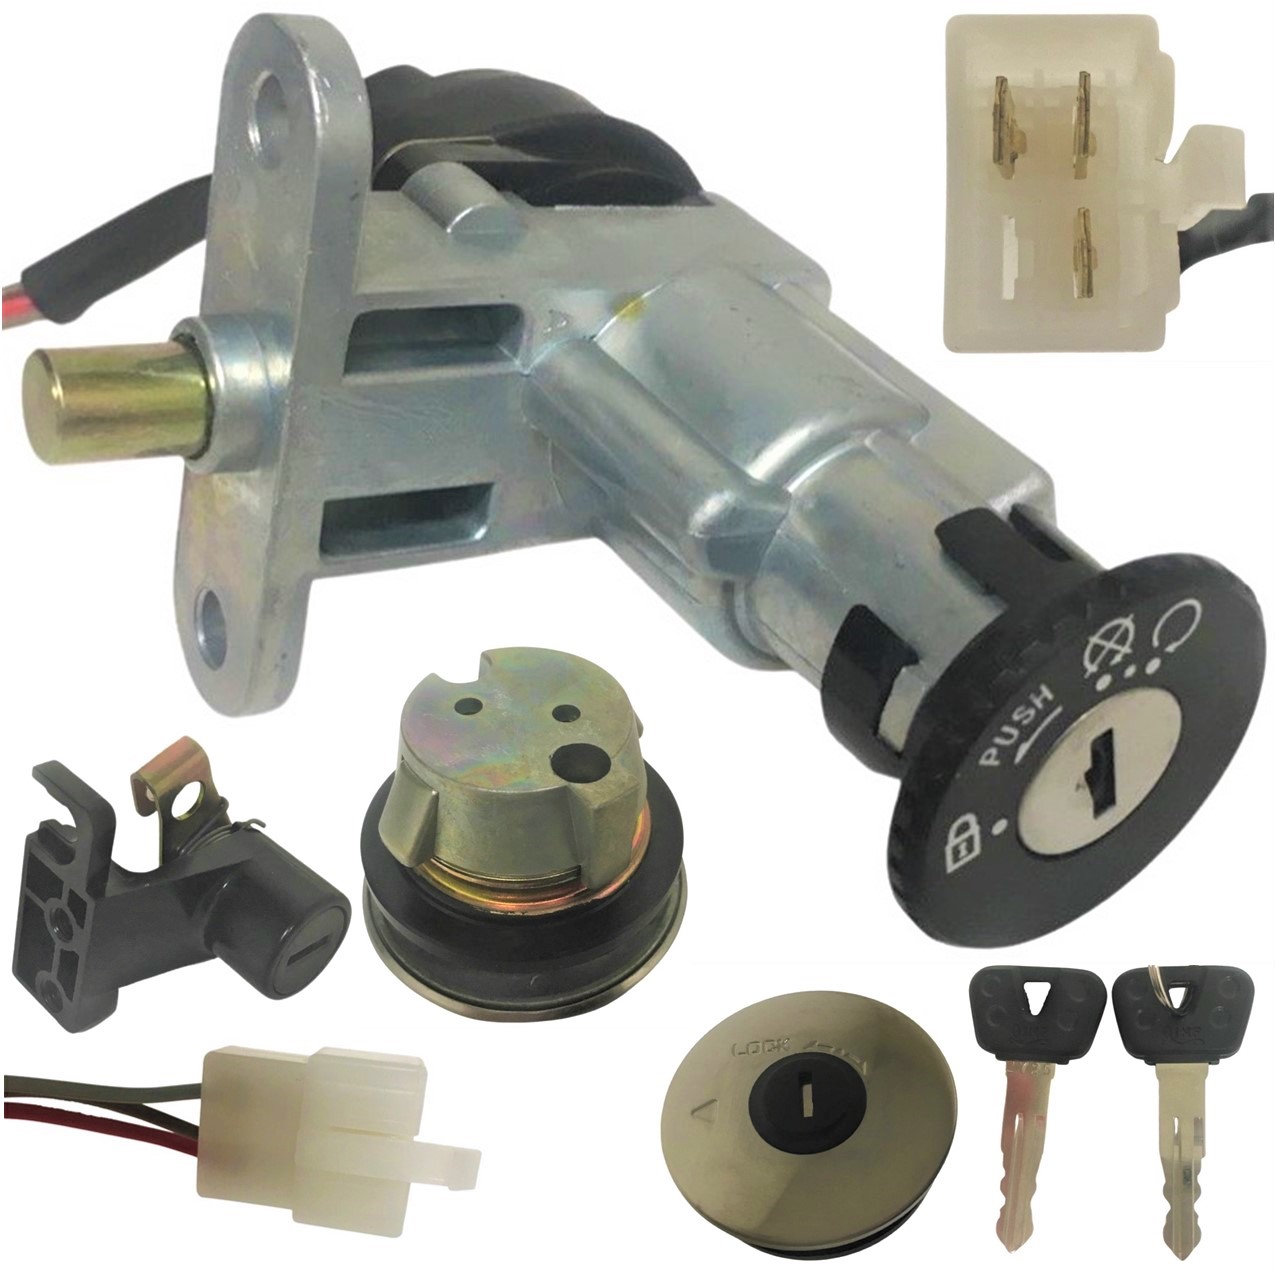 Ignition Switch Fits E-Ton Beamer 50, Matrix 50, 49cc Scooters + Others. 3 Pins in 4 Pin FM Jack Bolt holes Ctr to Ctr= 50mm - Click Image to Close